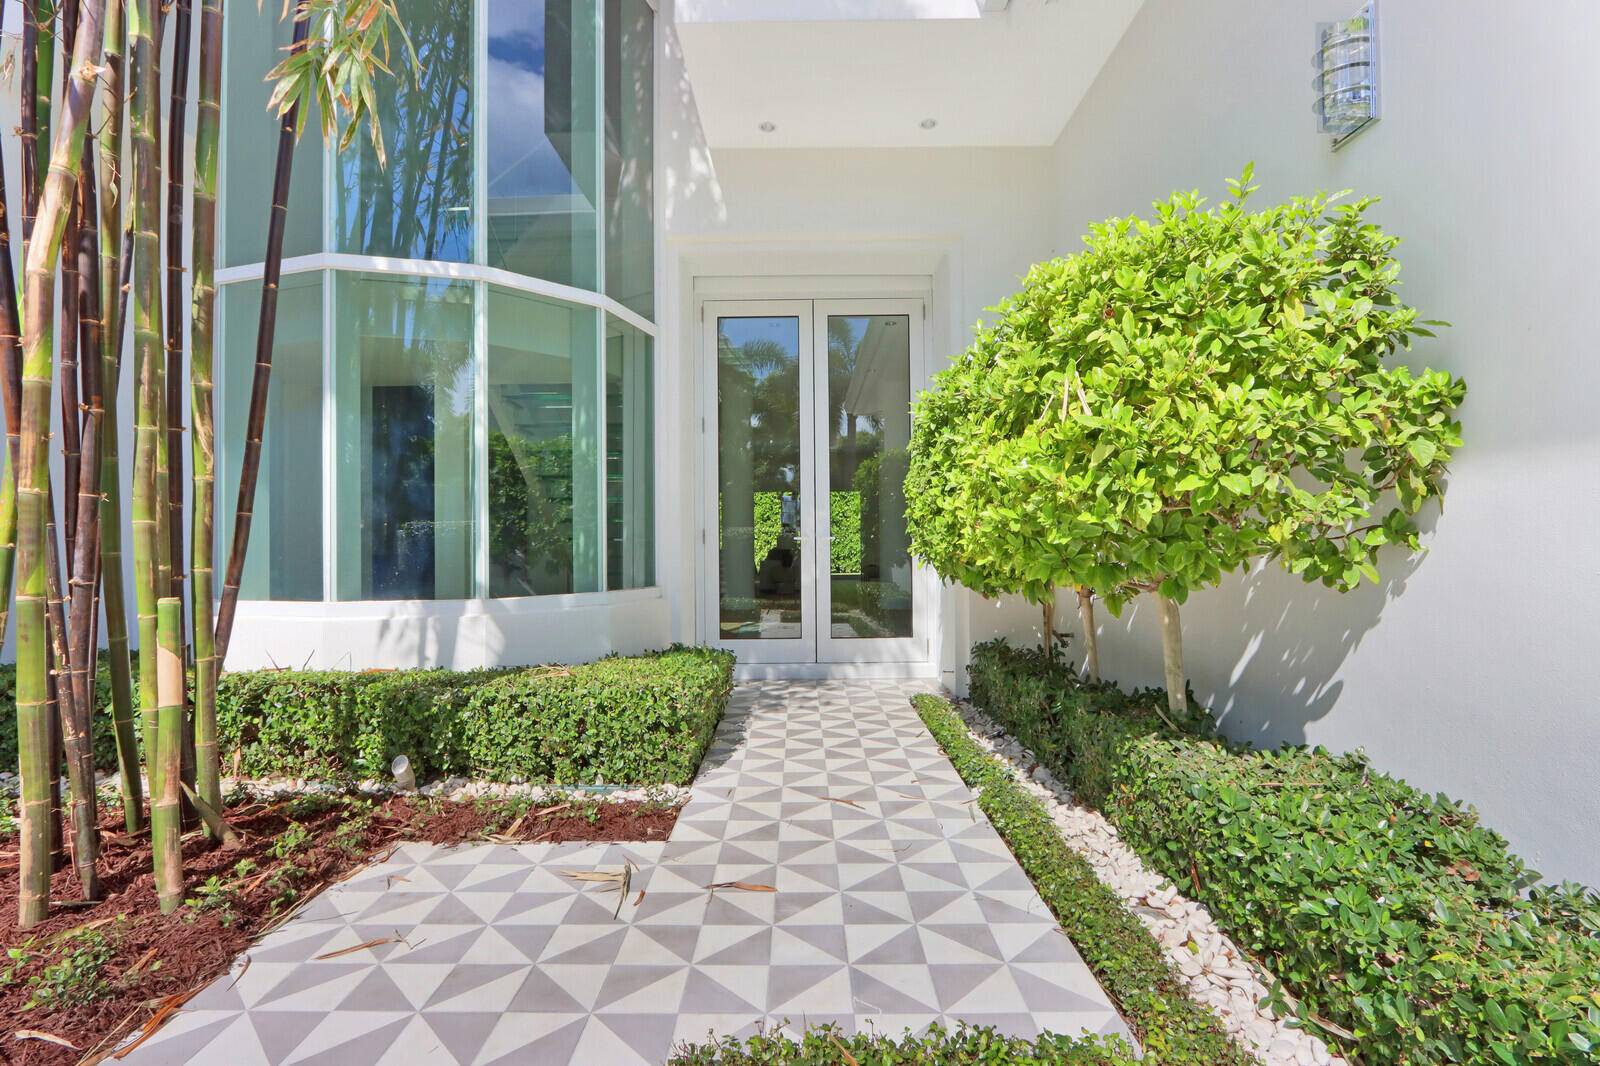 215 Indian Road single-family Palm Beach